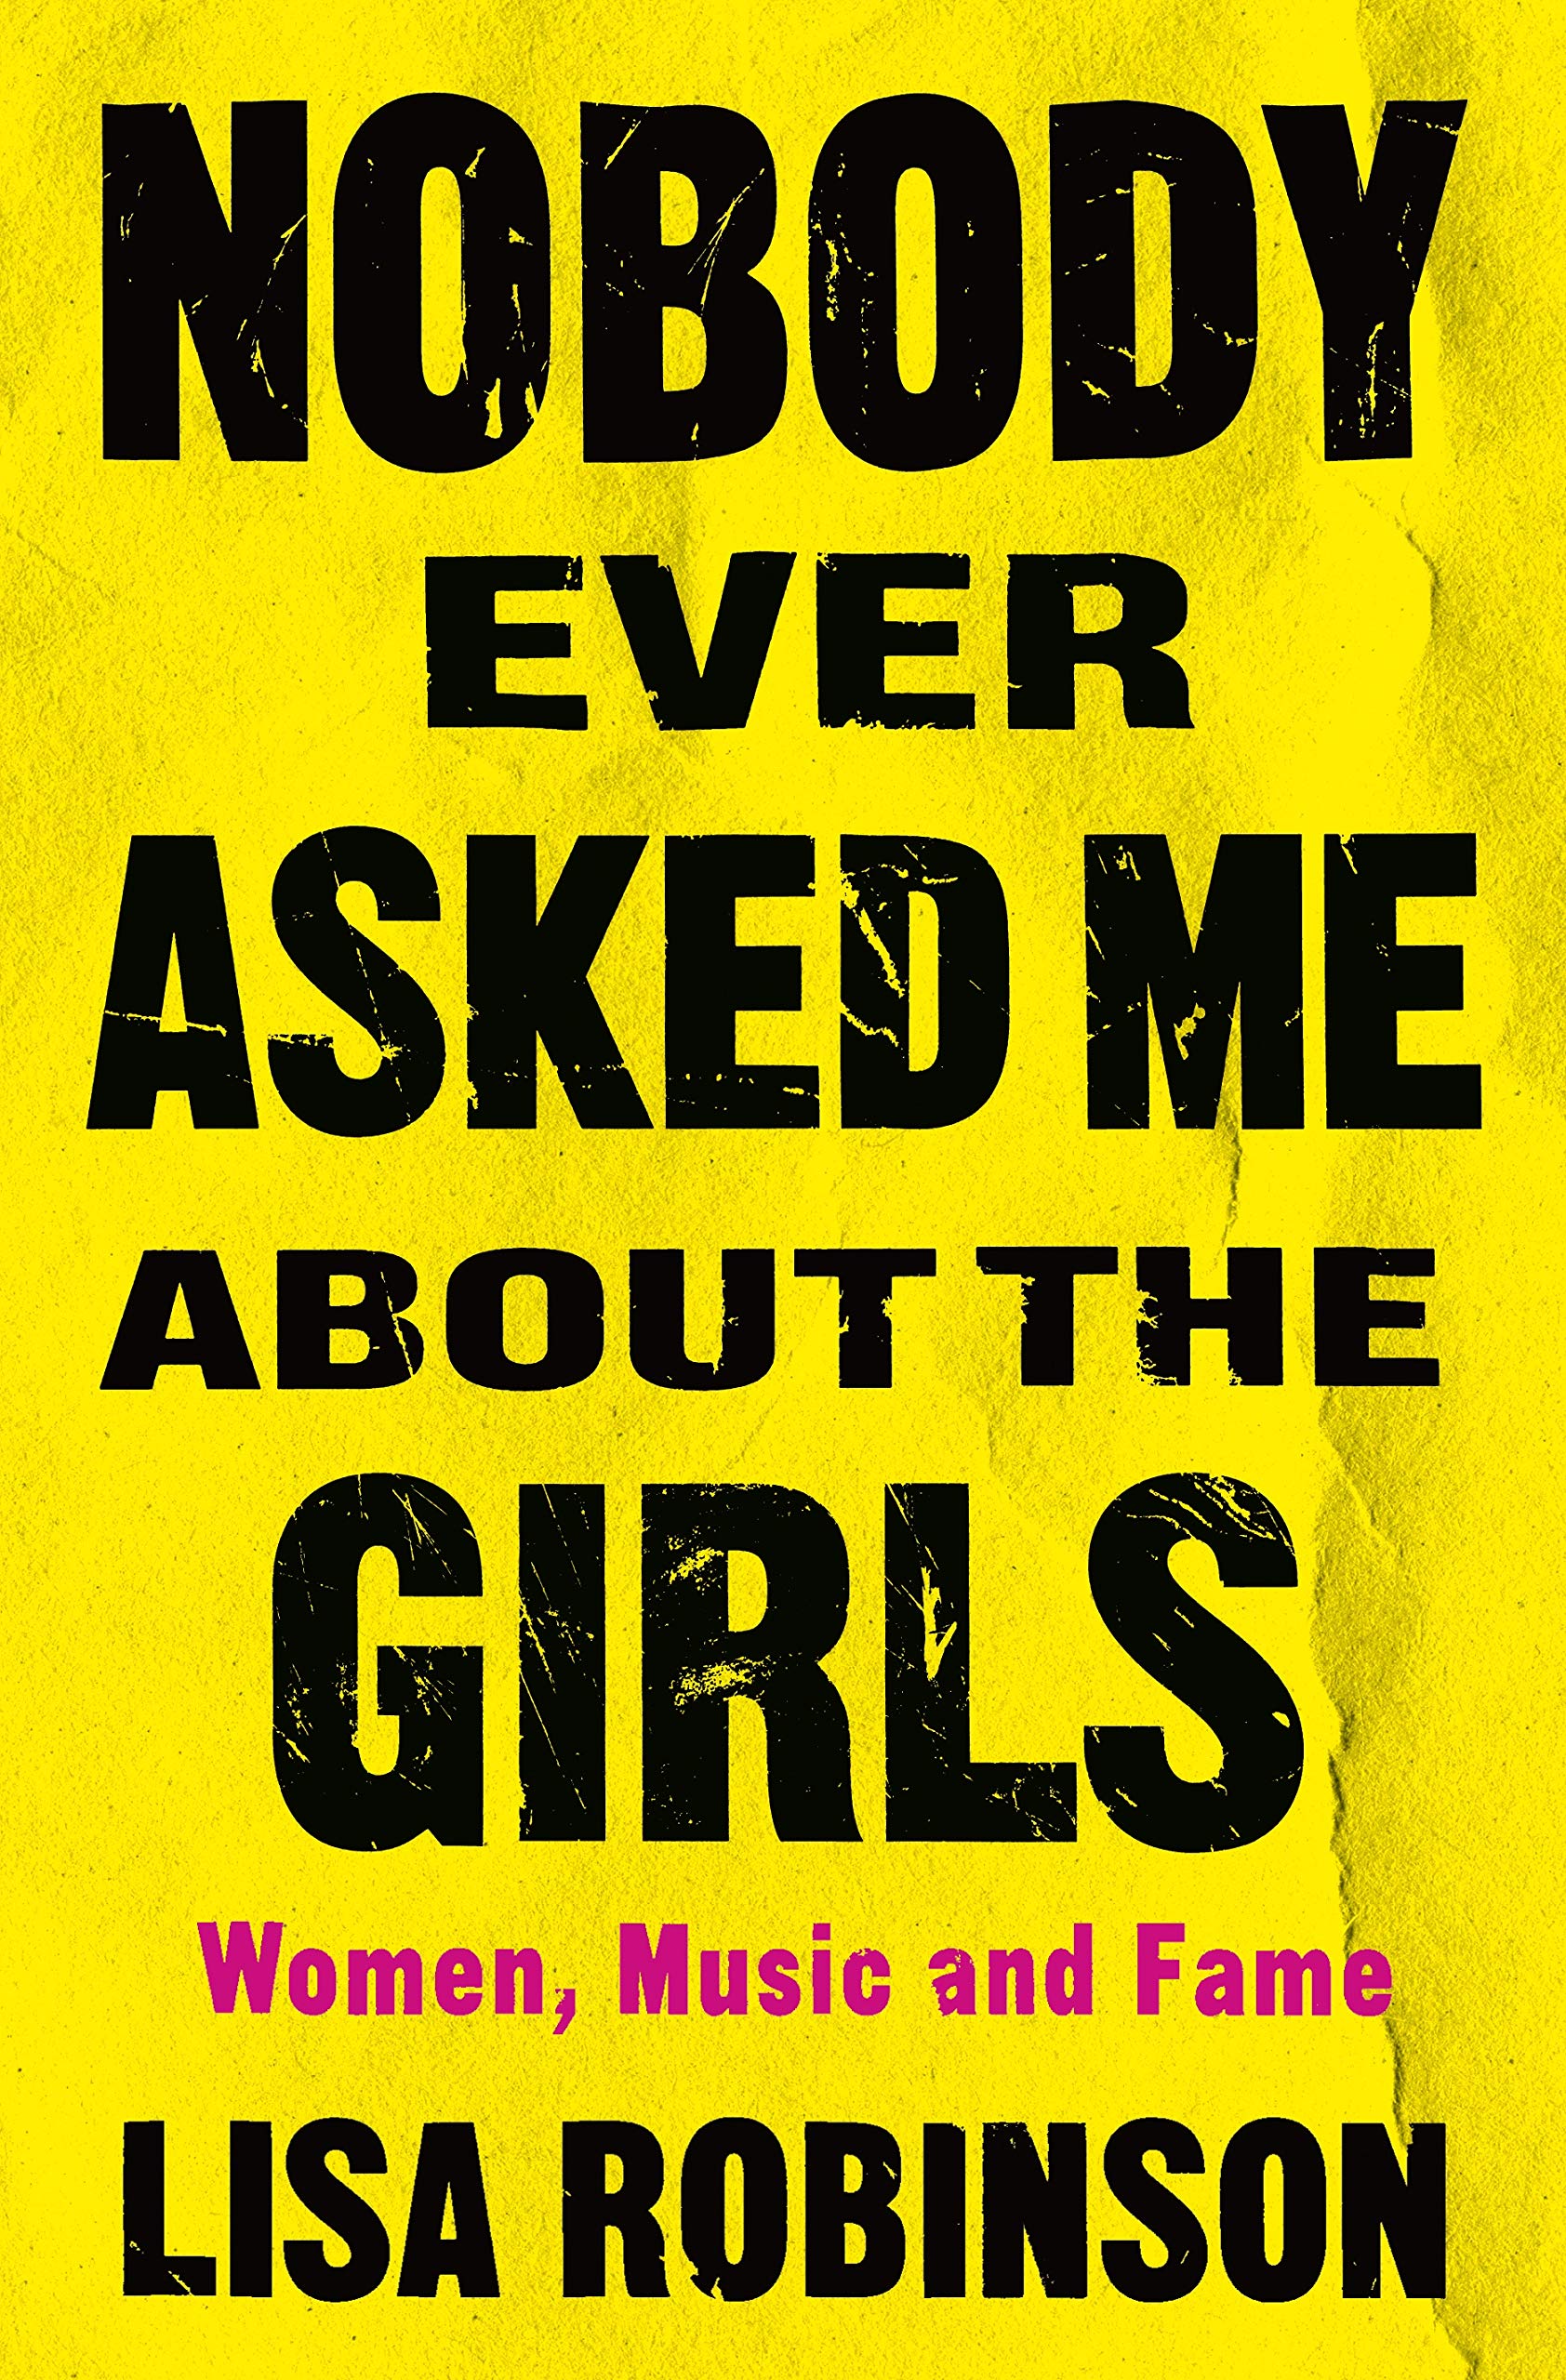 Image for "Nobody Ever Asked Me about the Girls"